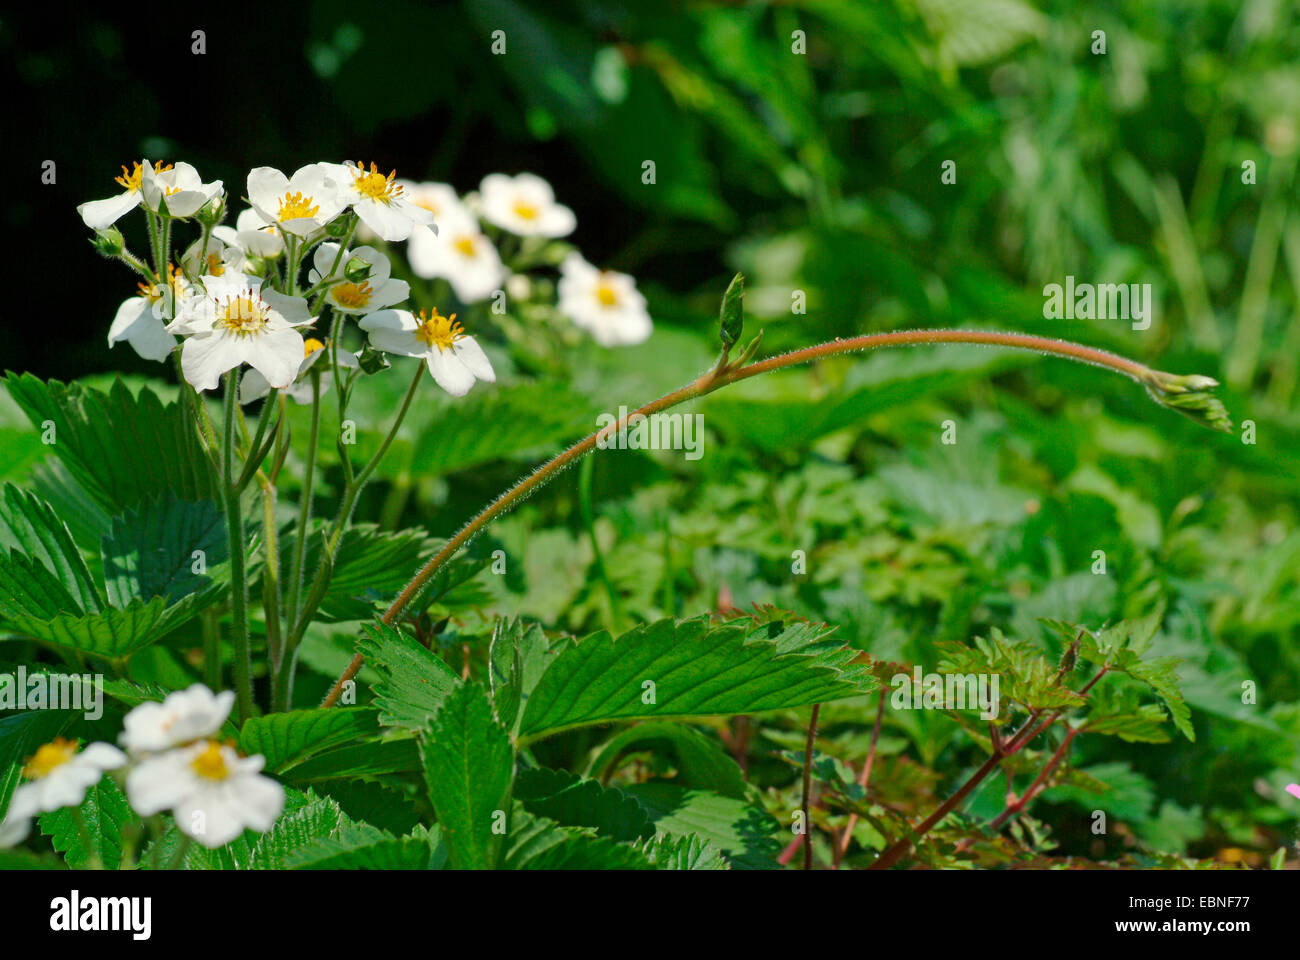 Hautbois strawberry, Musk strawberry (Fragaria moschata), blooming, with stolon, Germany Stock Photo